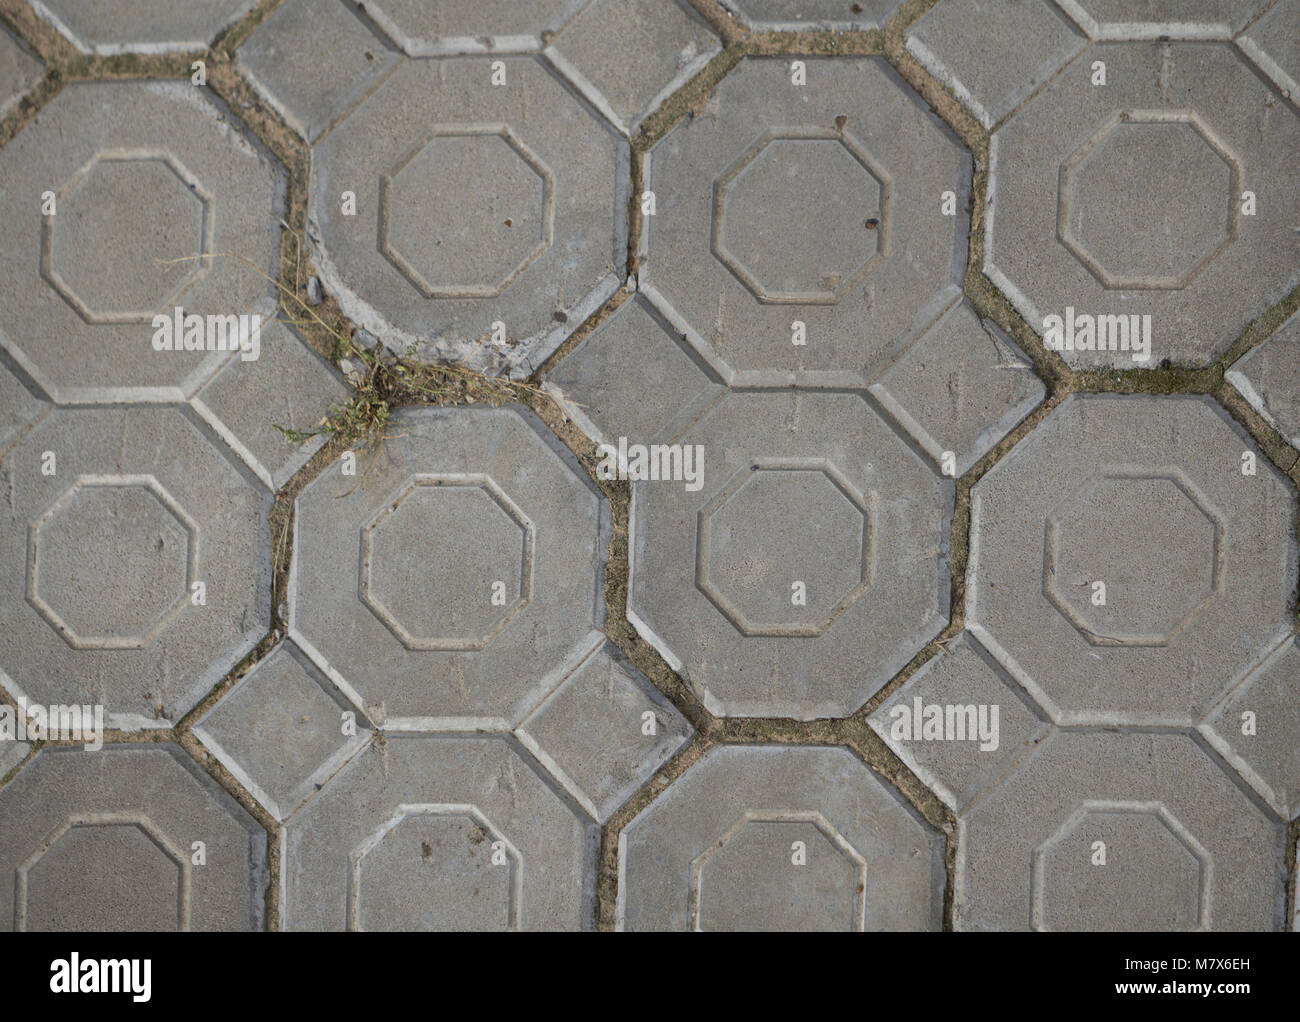 Abstract background - gray paving slabs in the form of squares. Stock Photo